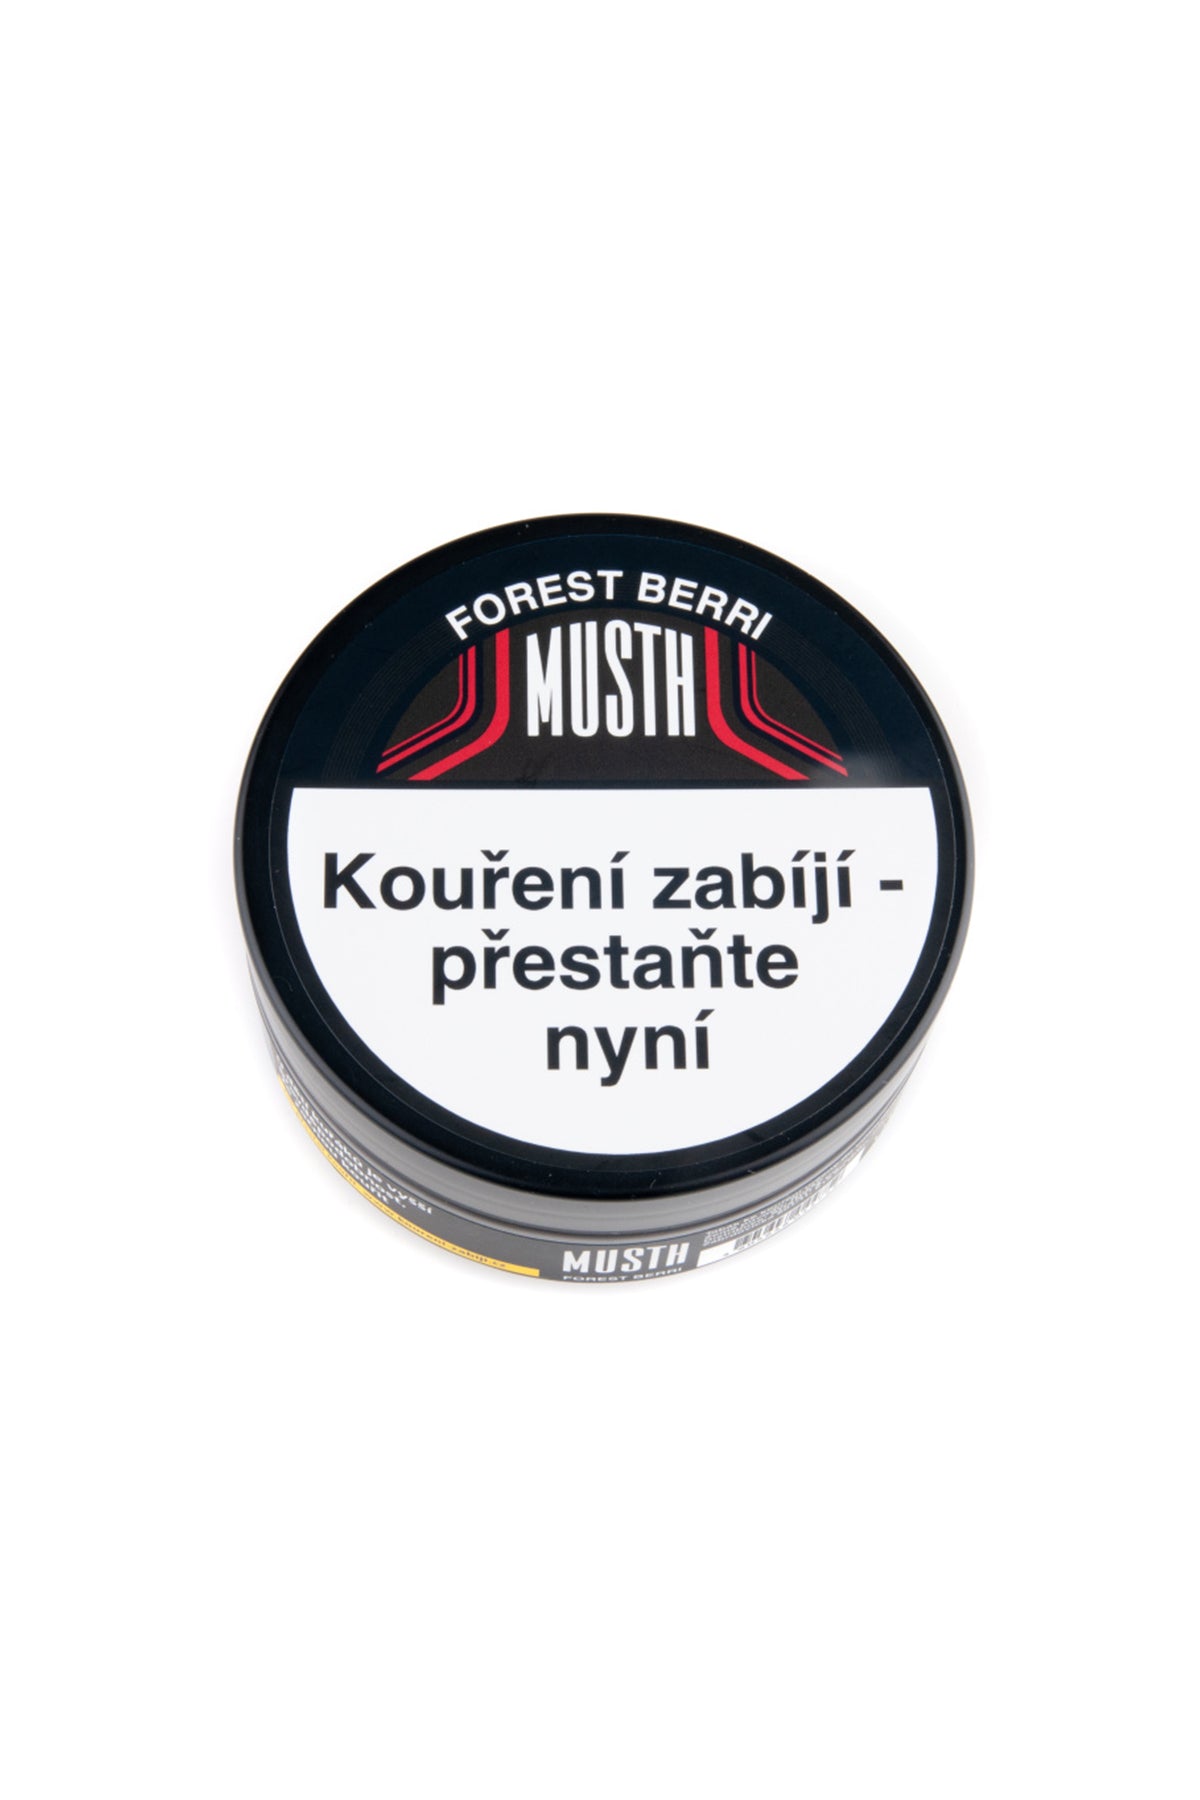 Tabák - MustH 125g - Forest Brrs